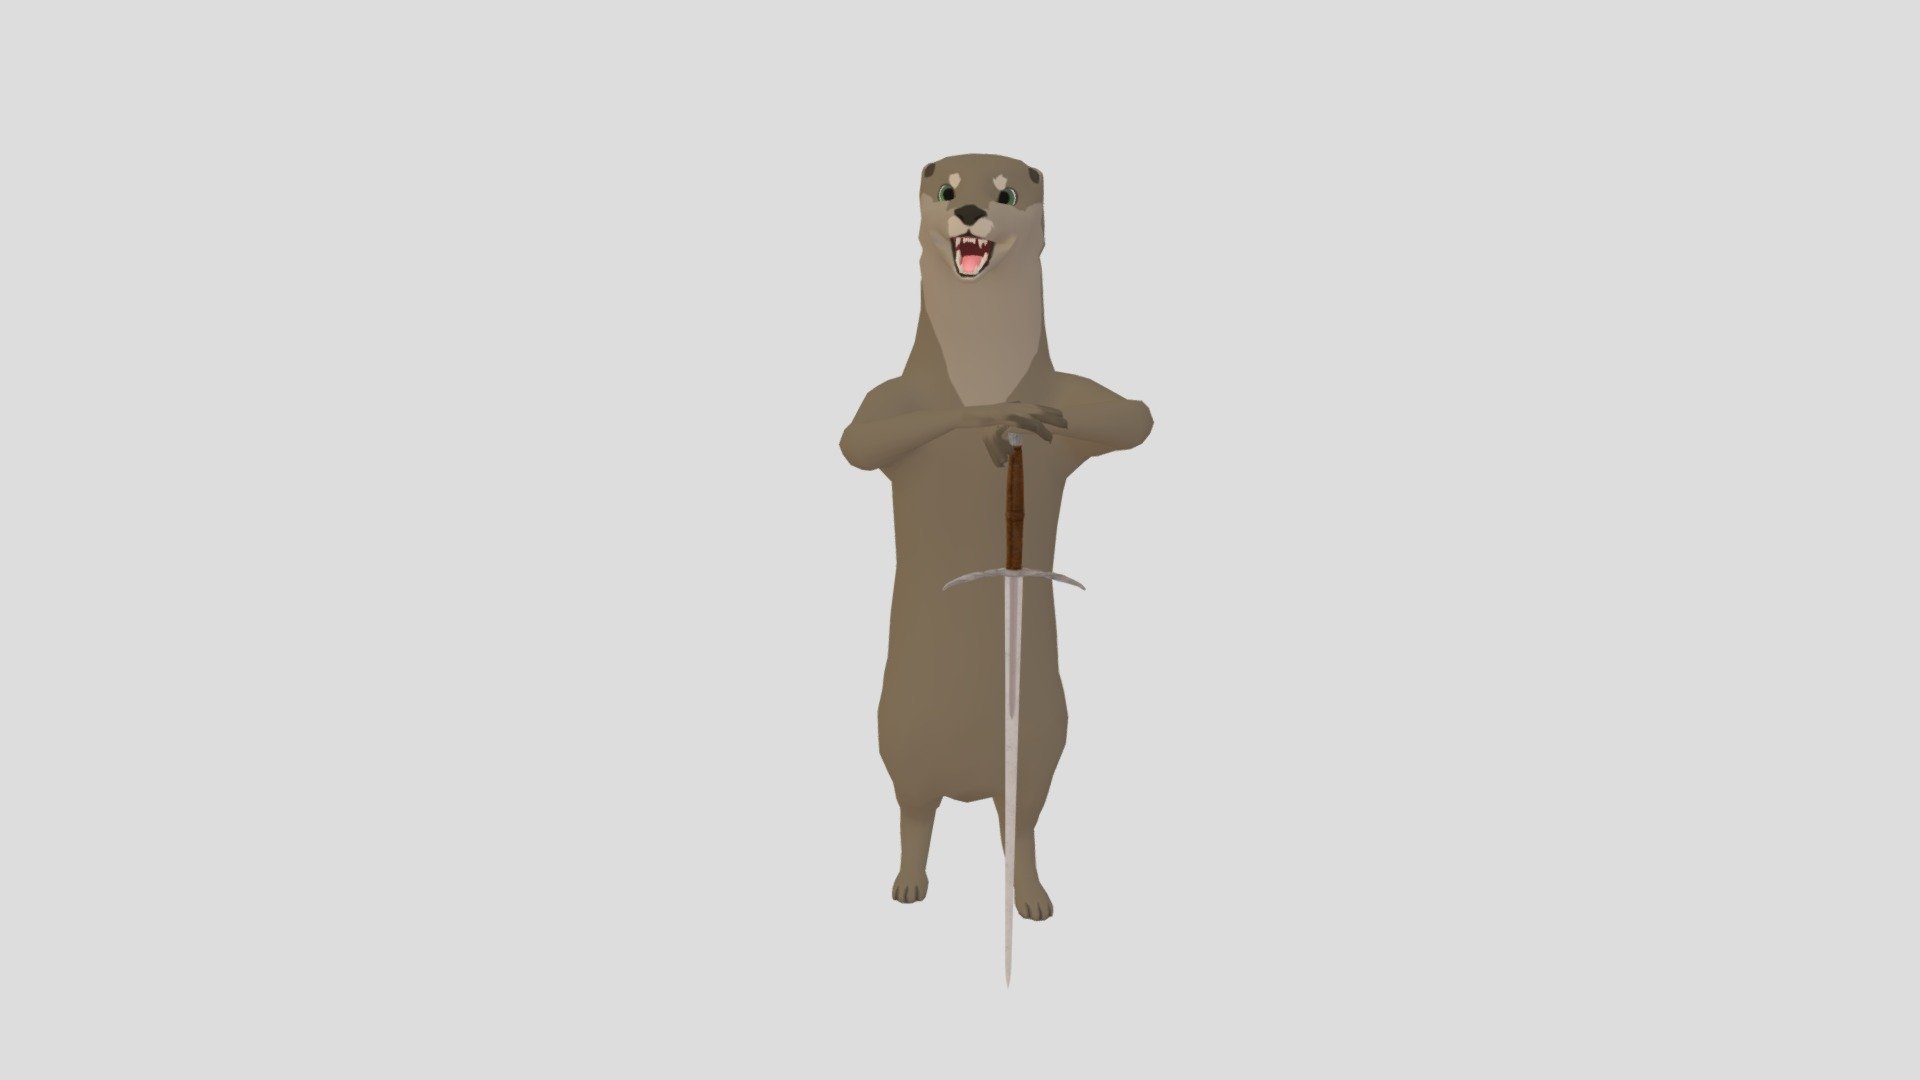 Otter Character